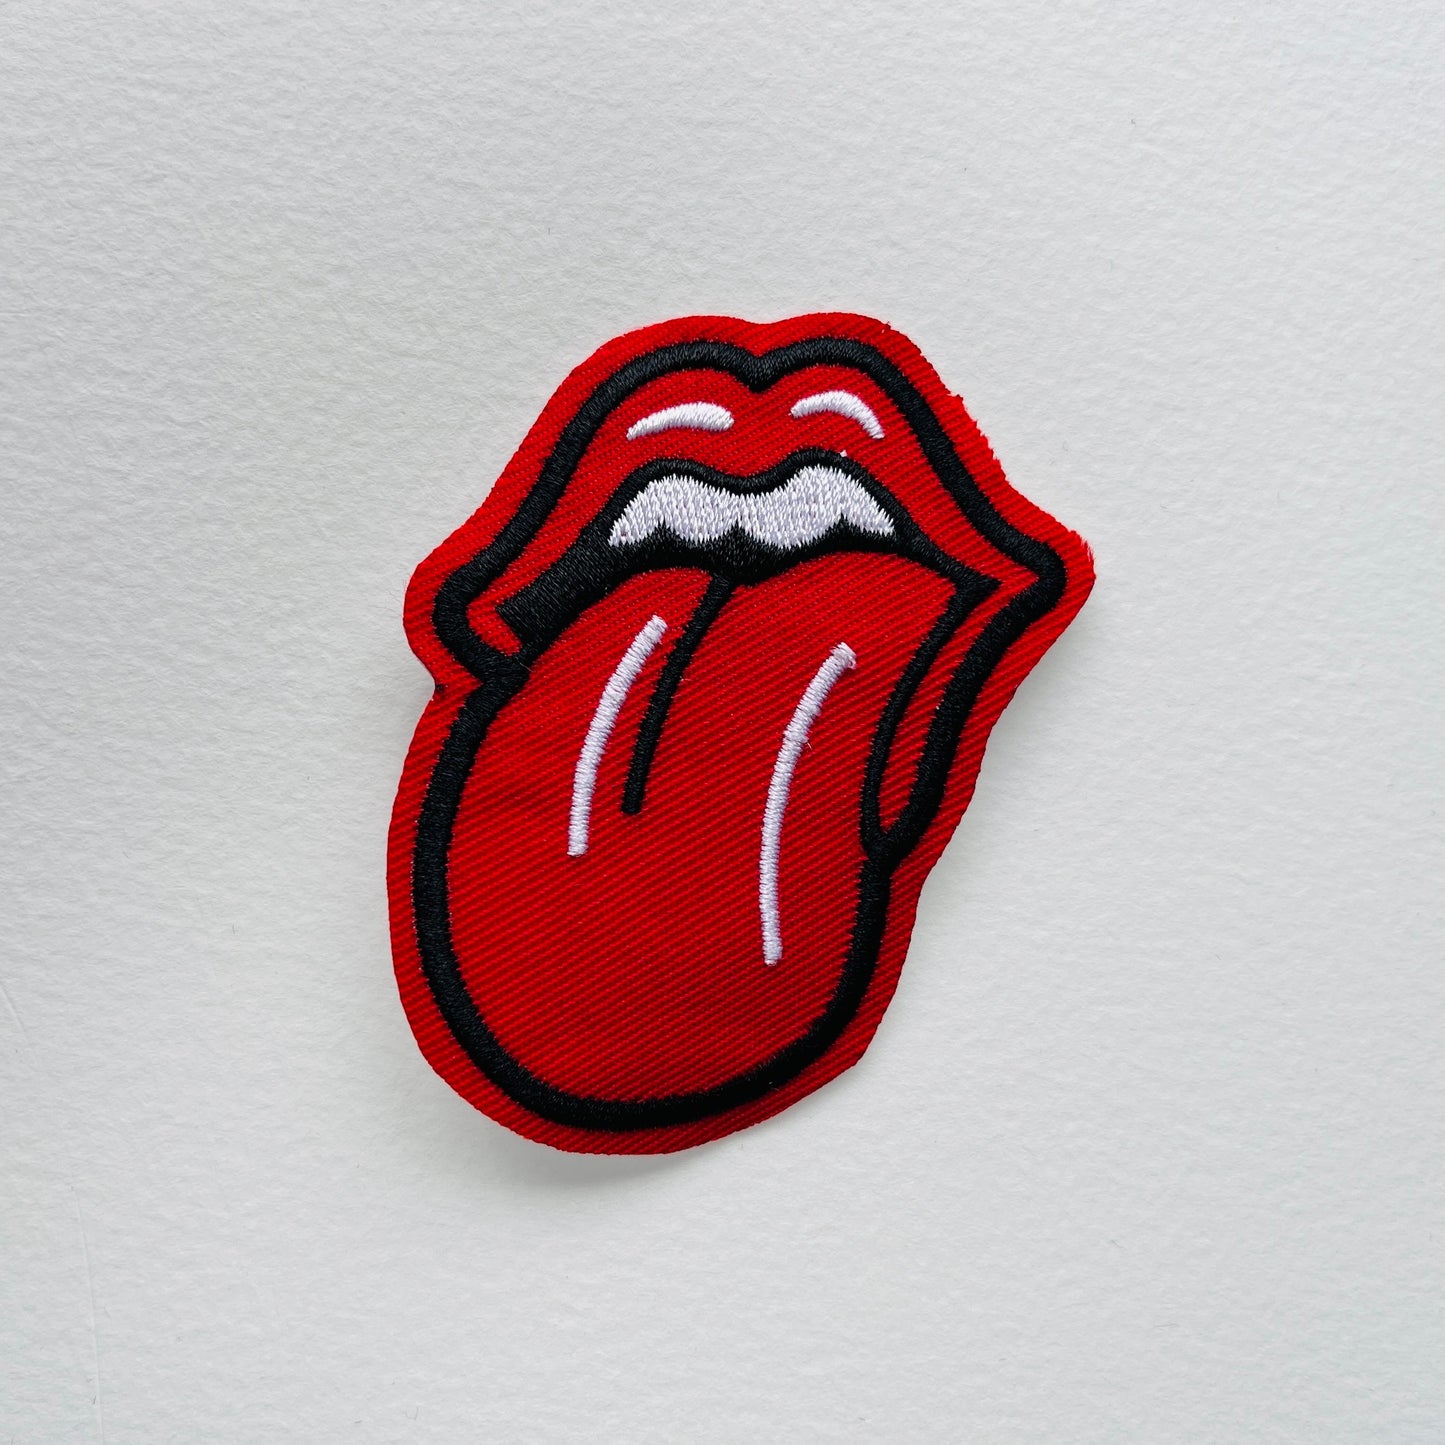 rollong stones logo, red tongue, 40 licks logo embroidered iron on embroidered patch appliqué badge